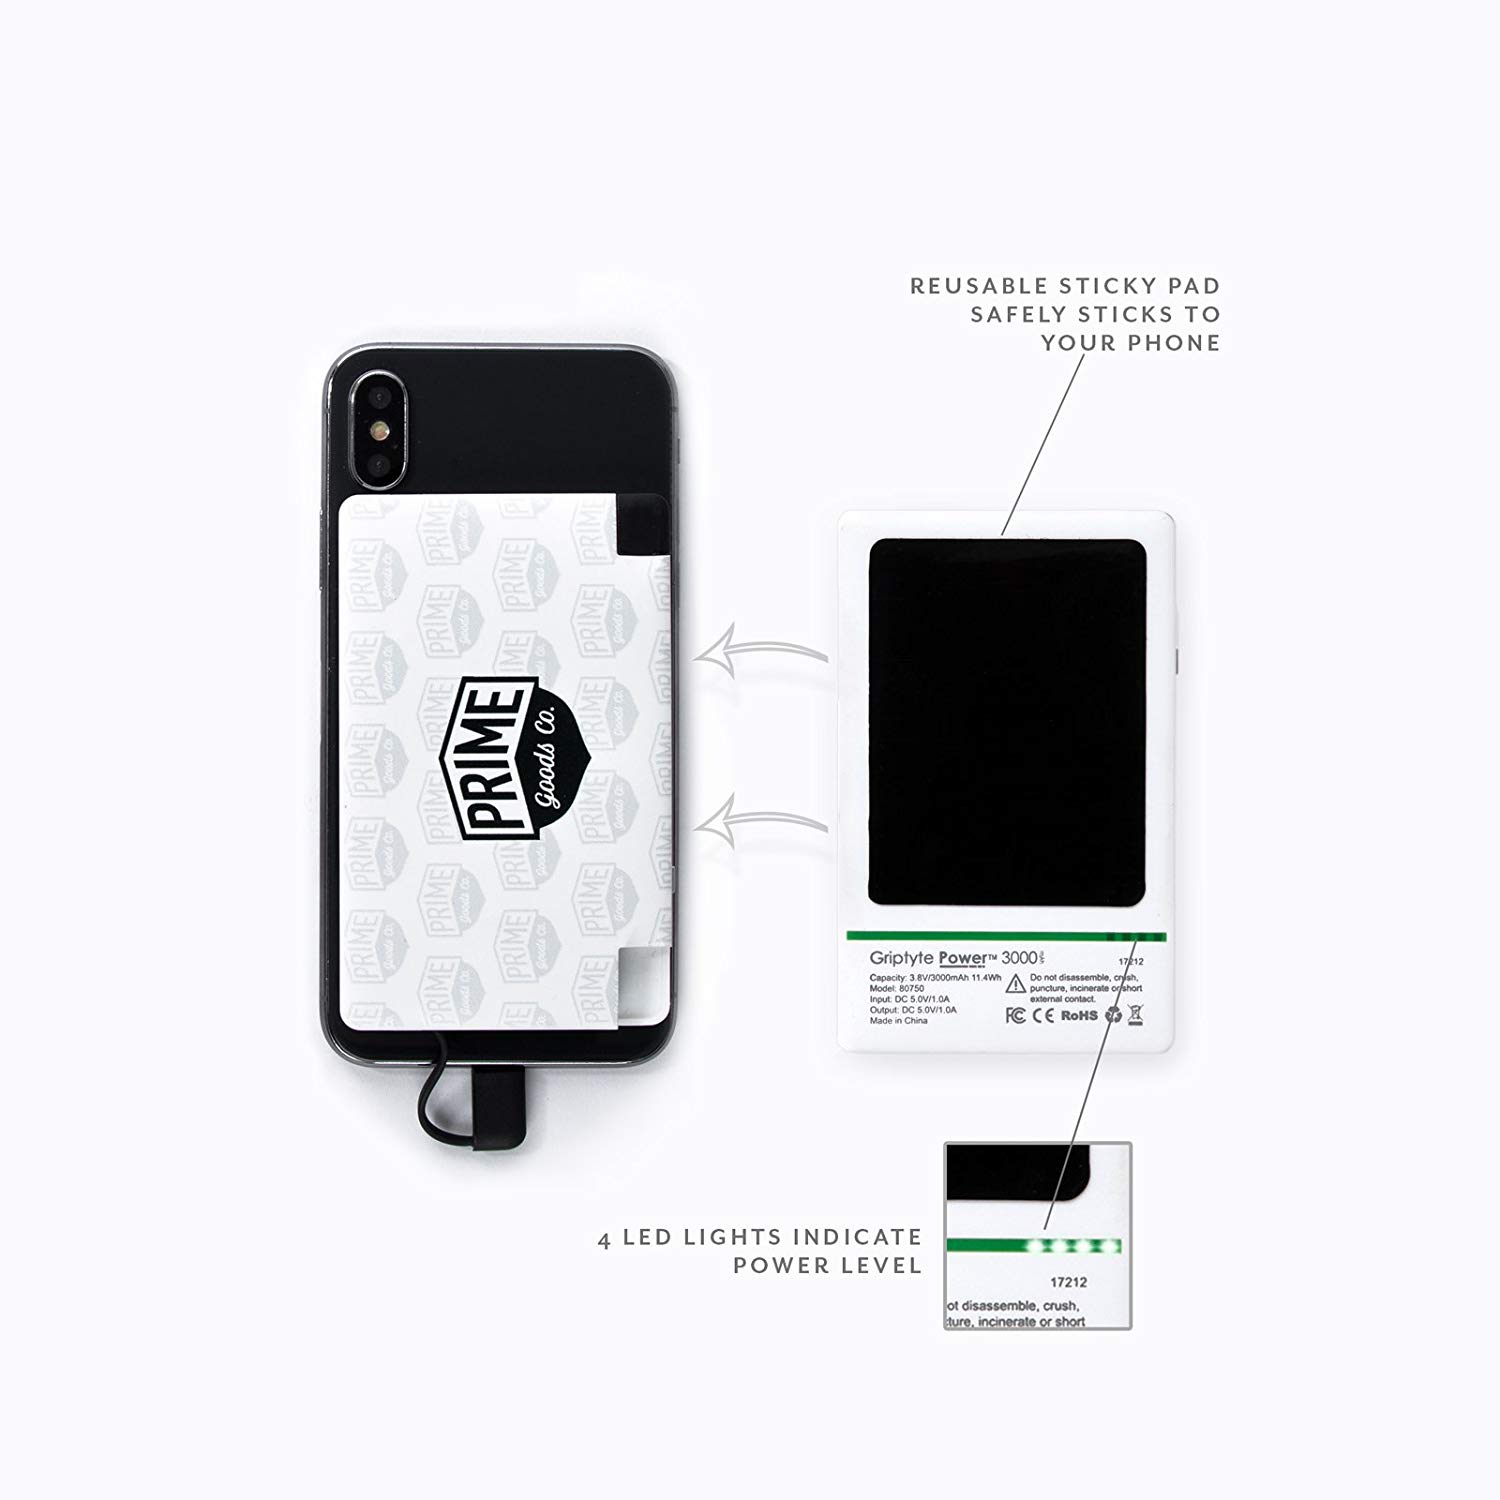 Sticky Pad Power Bank Case Cell Phone Charger - Smartphone , HD Wallpaper & Backgrounds